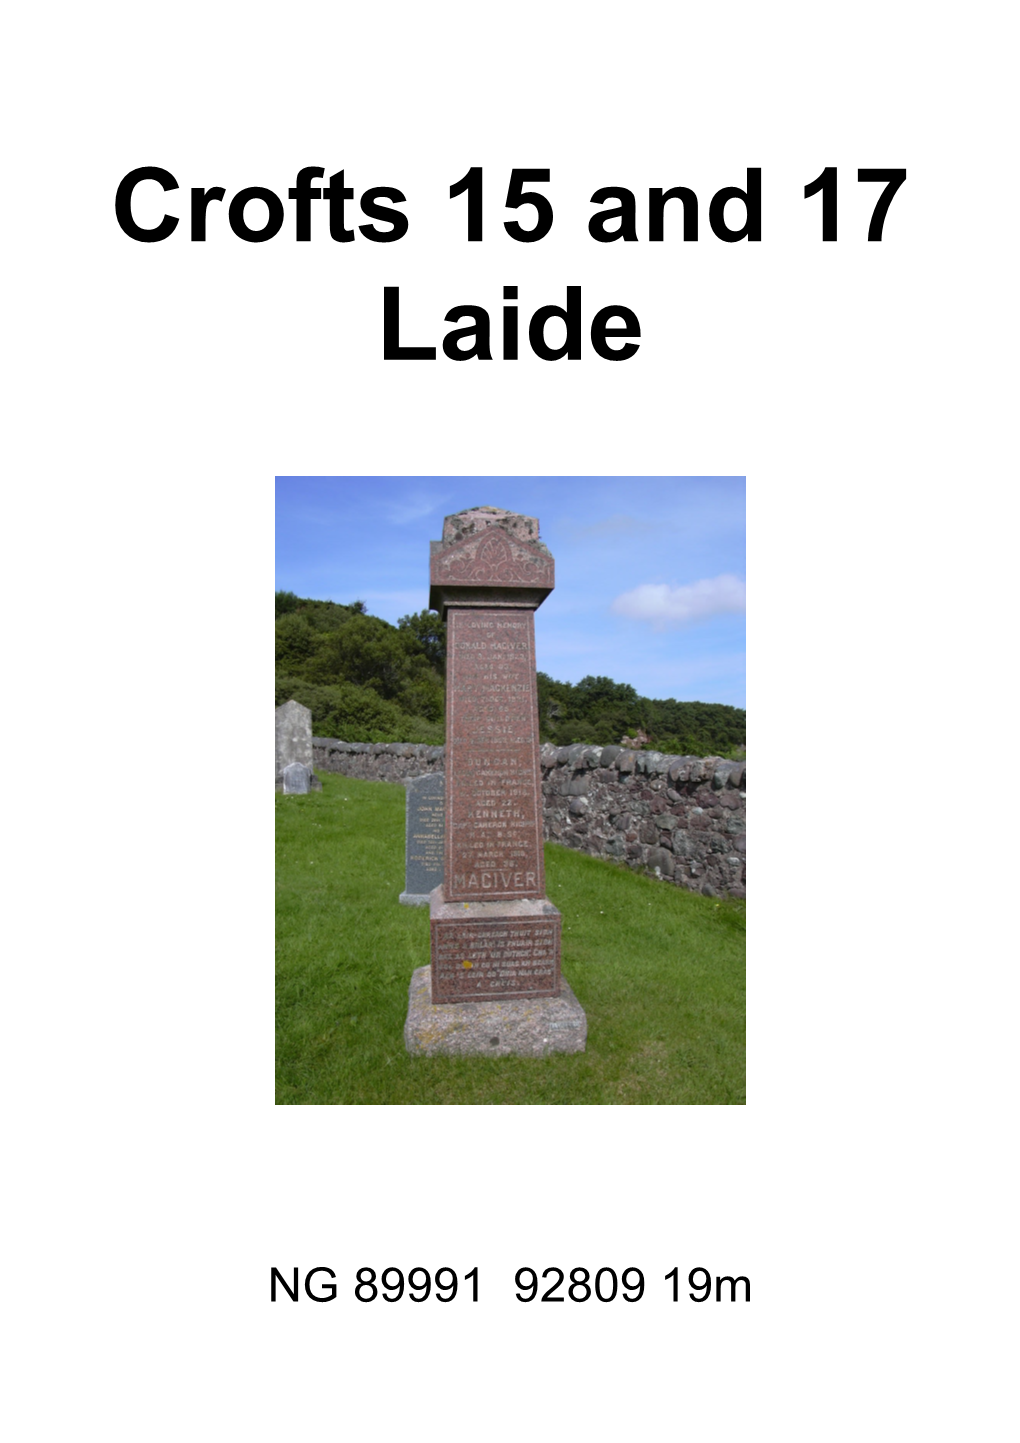 Crofts 15 and 17 Laide